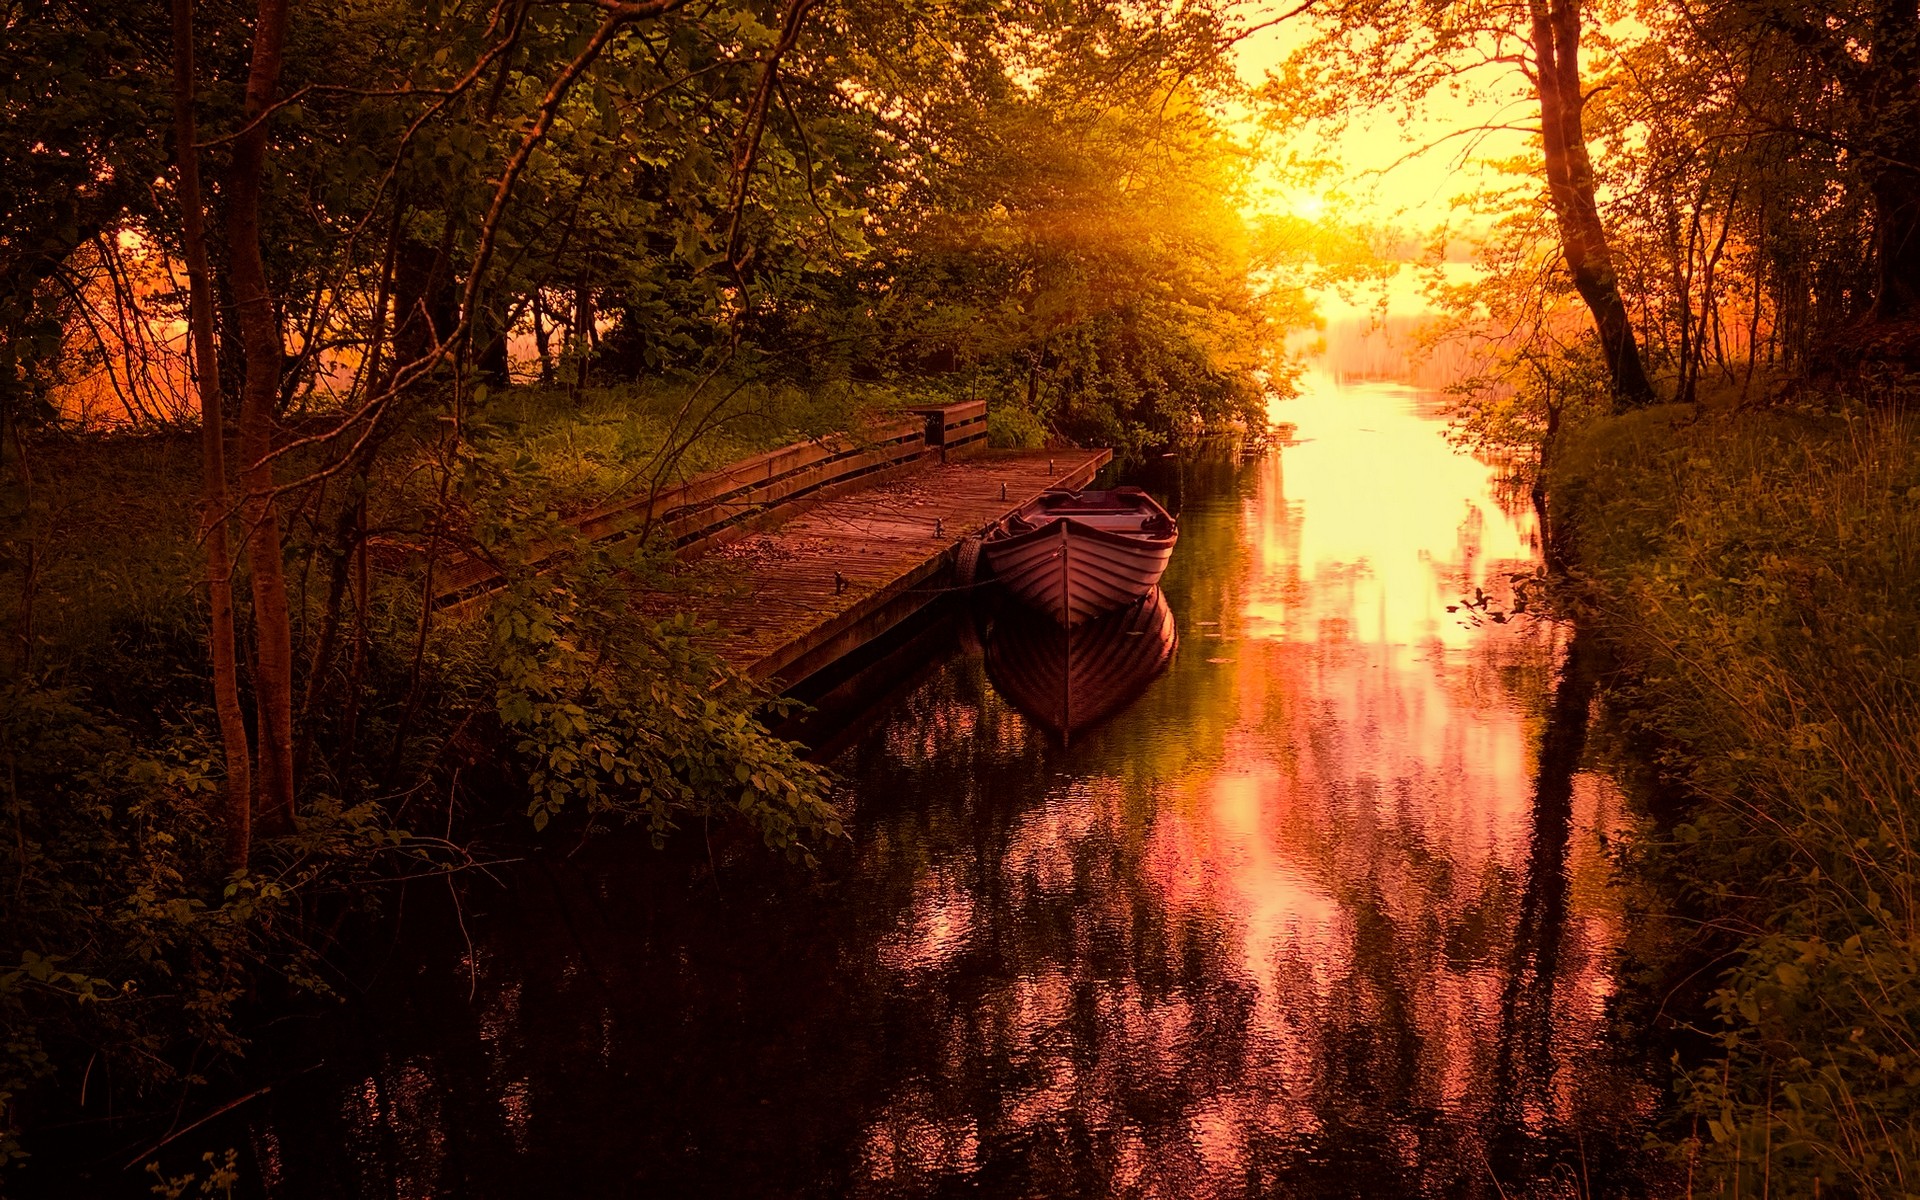 General 1920x1200 nature landscape sunset trees boat dock canal shrubs calm yellow water grass low light